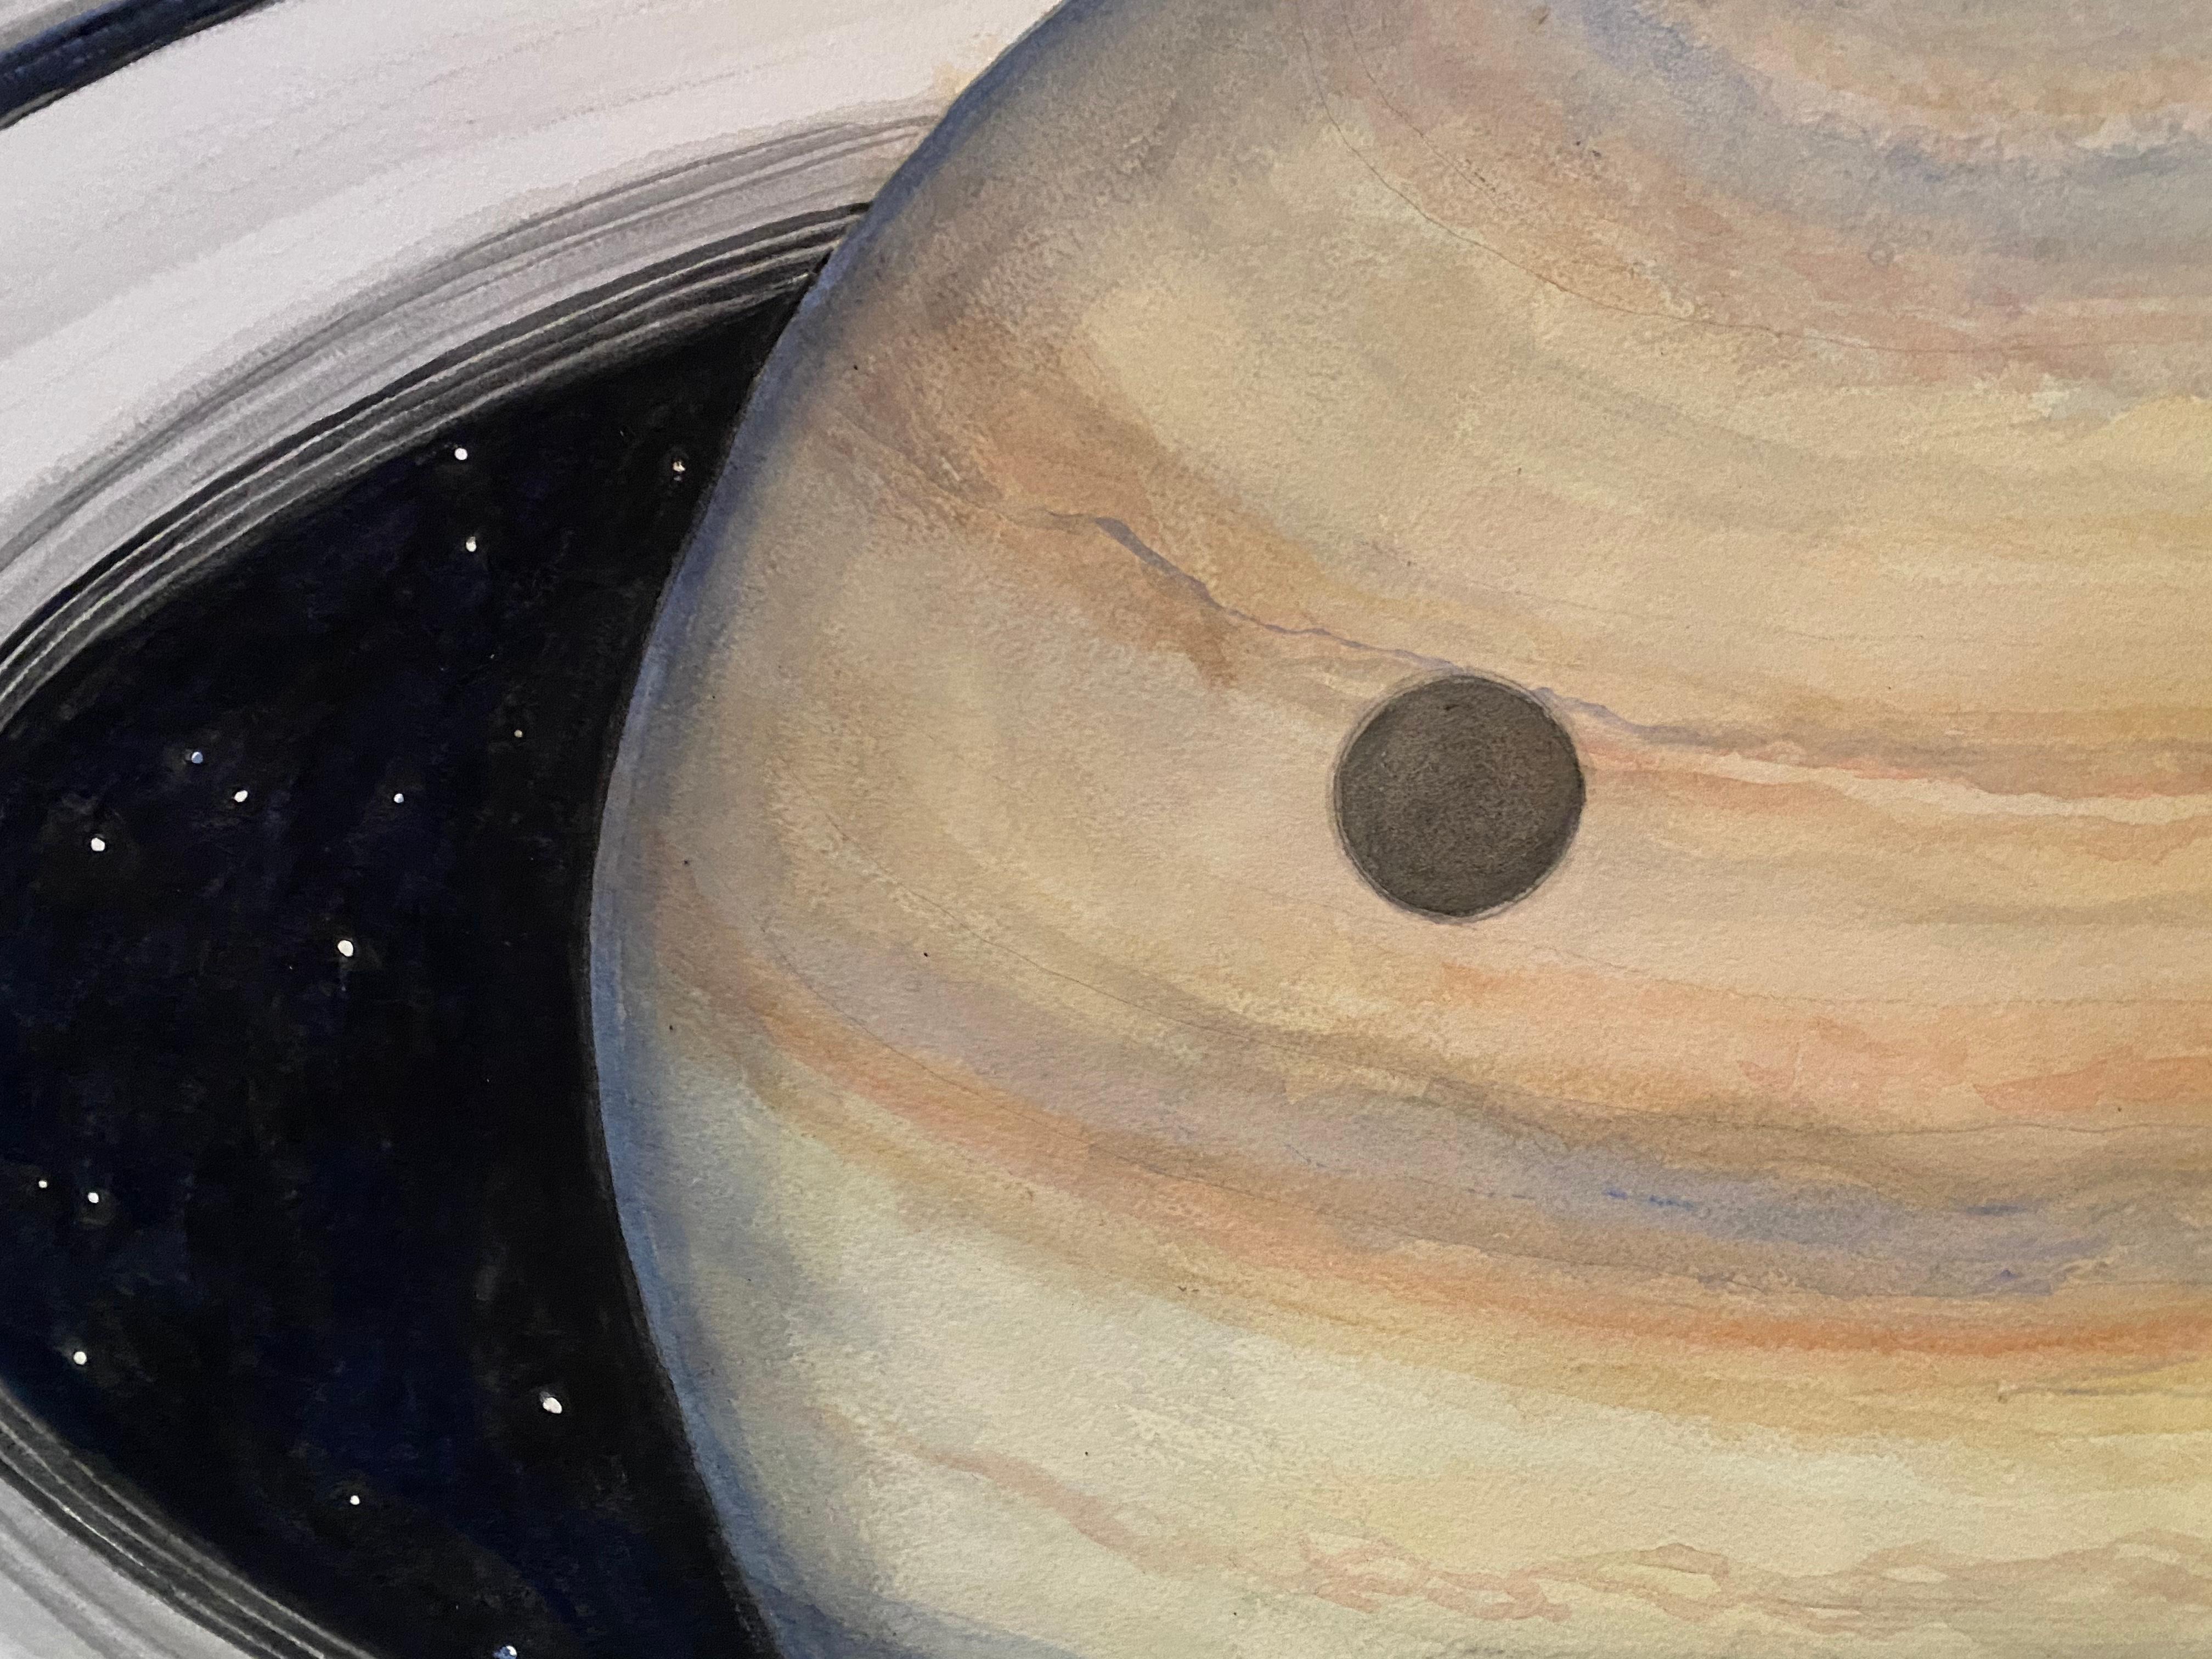 This large scale watercolor depiction of outer space features the planet Saturn and its moon Titan.  Composed and painted by the New York artist, Thomas Broadbent- this watercolor on paper creates a dramatic impression of these planetary bodies and